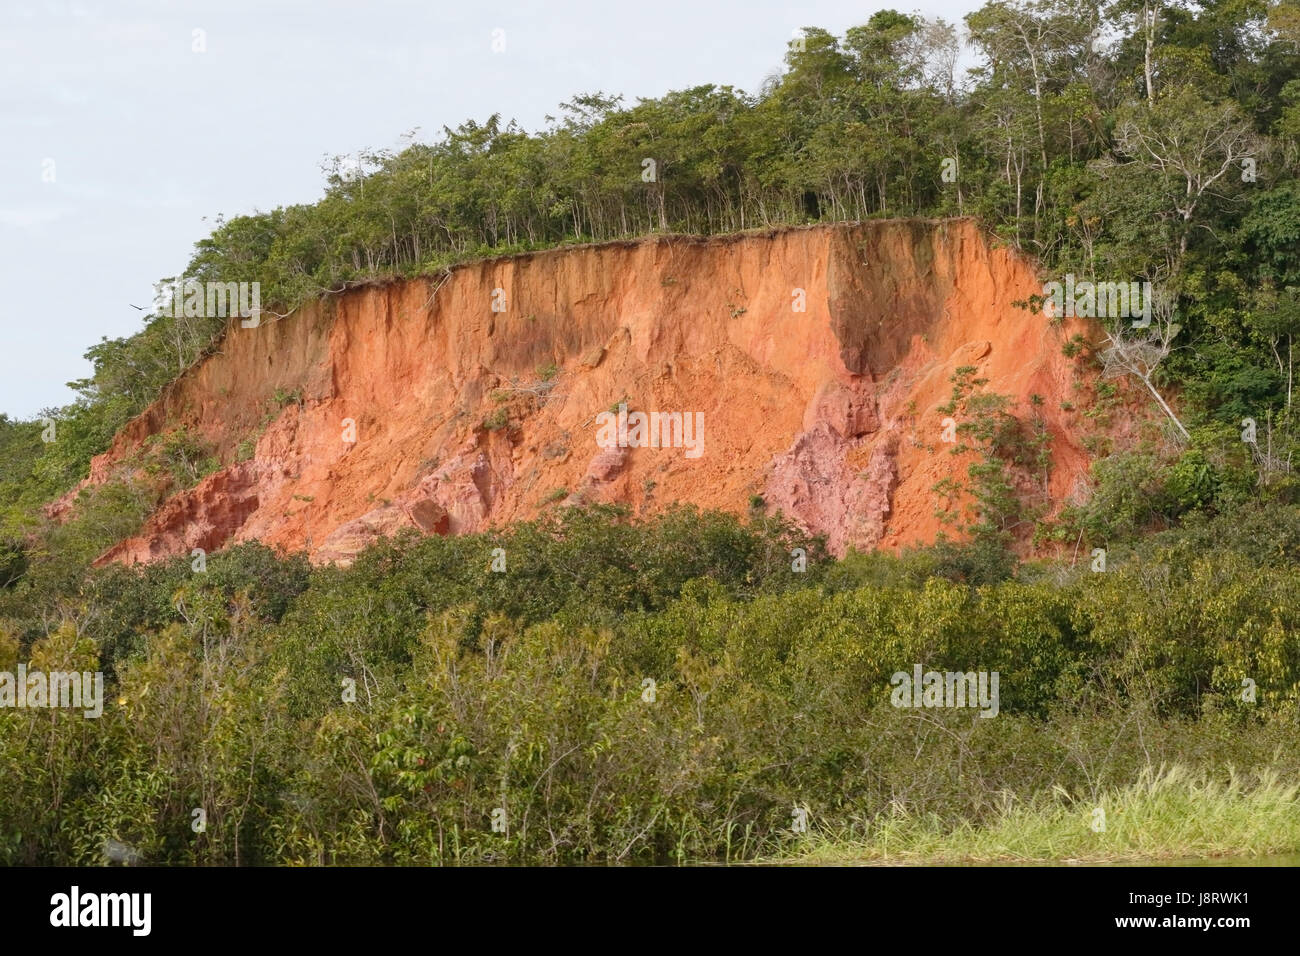 river Amazon showing river bank with soil erosion Stock Photo